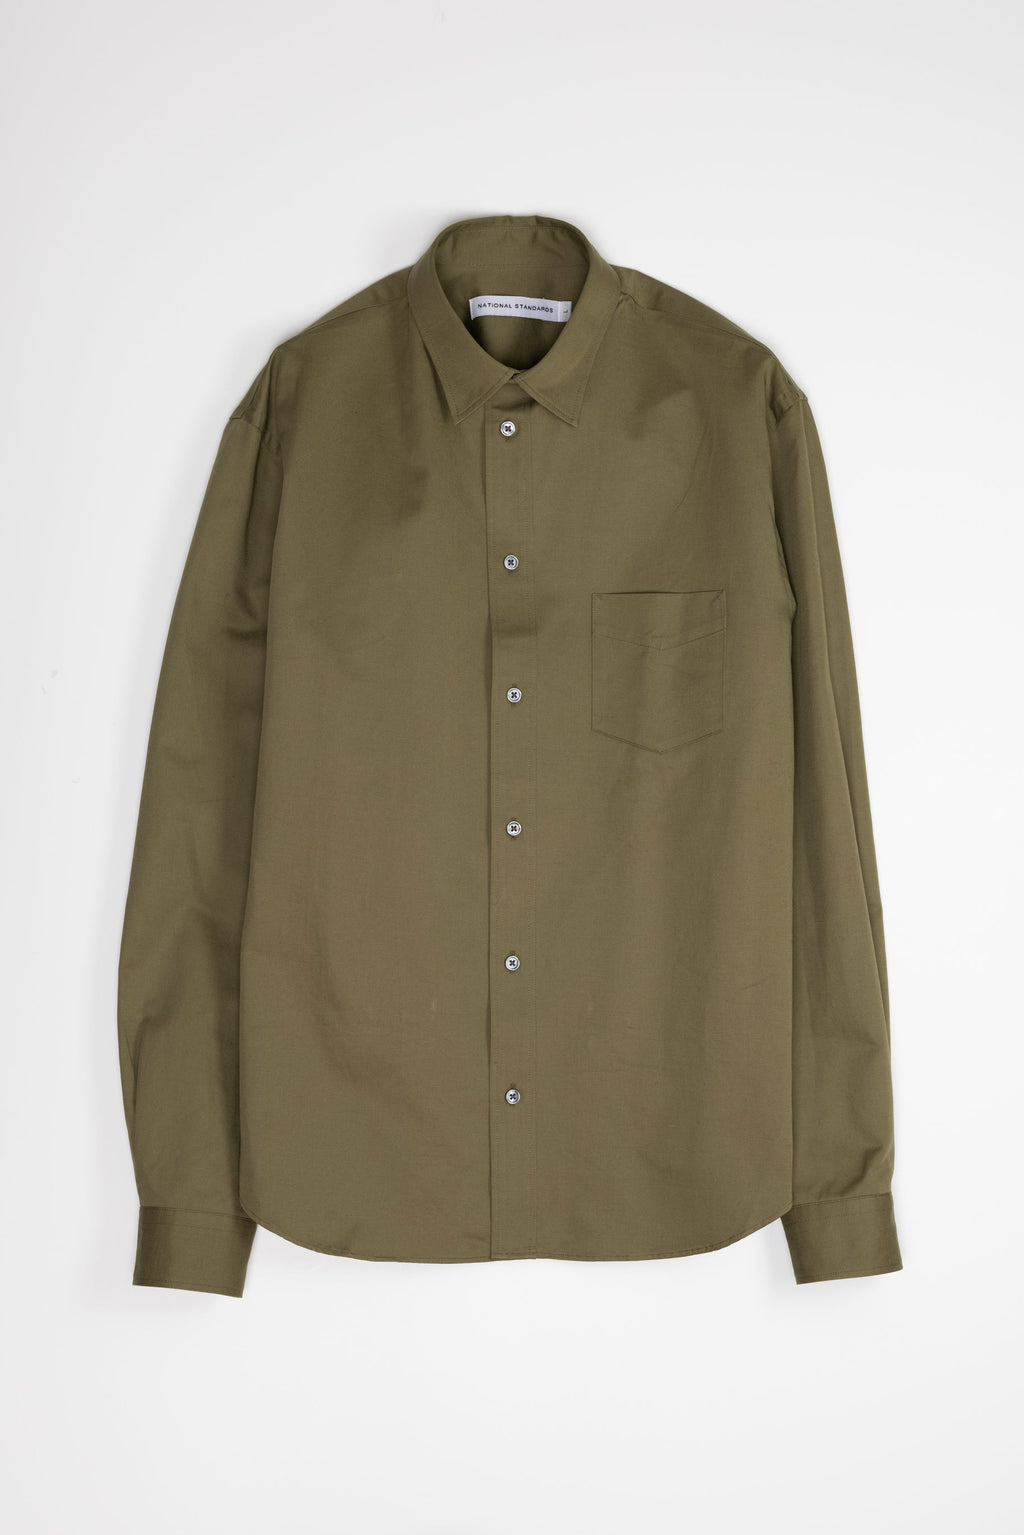 Japanese Military Cloth in Army Green 01